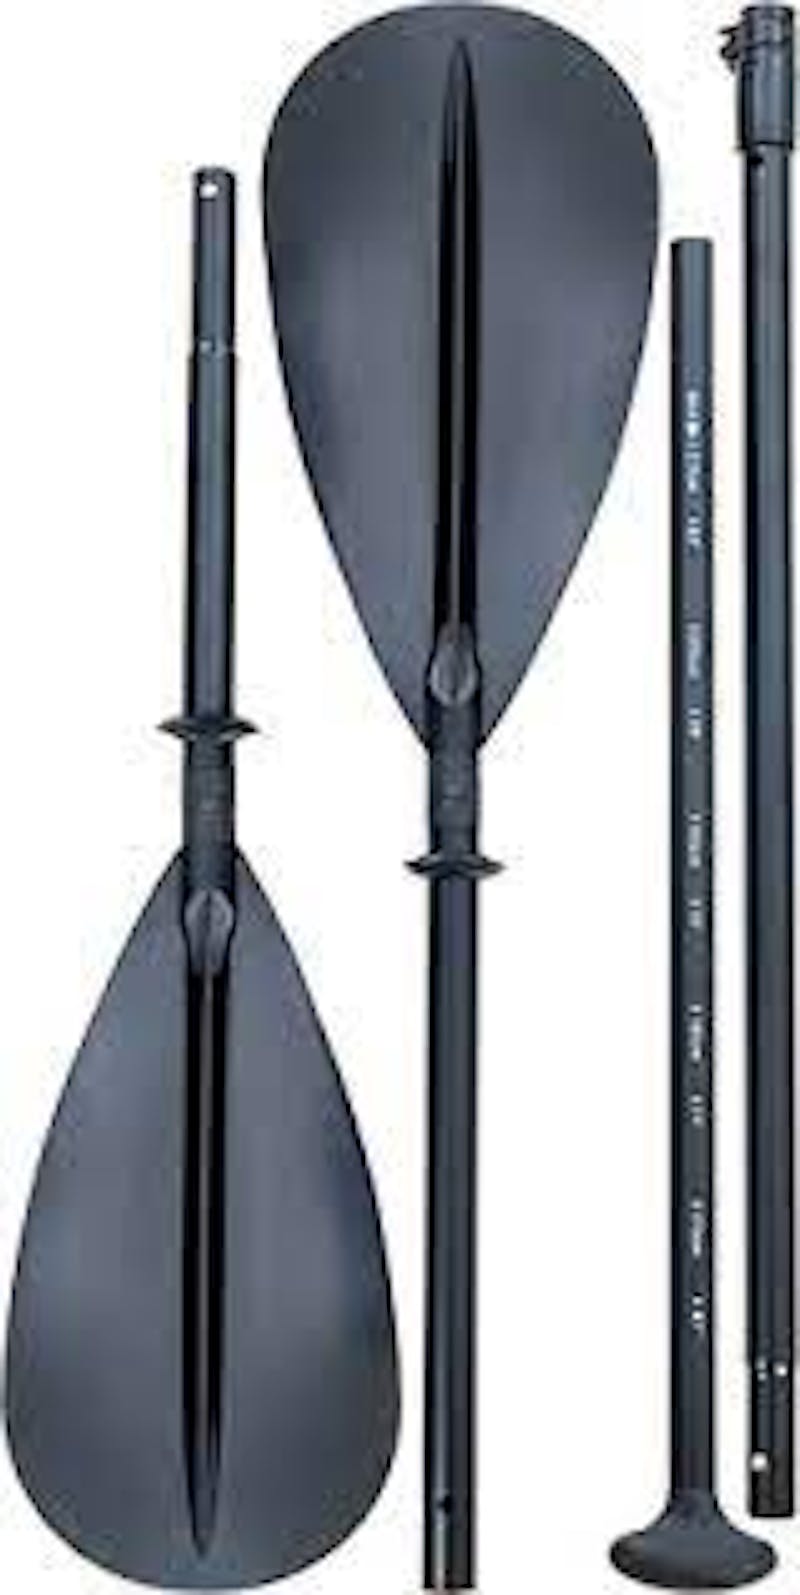 New 2021 F2 4 pieces Kayak Water Sports / Stand Up Paddle | Kajakpaddel